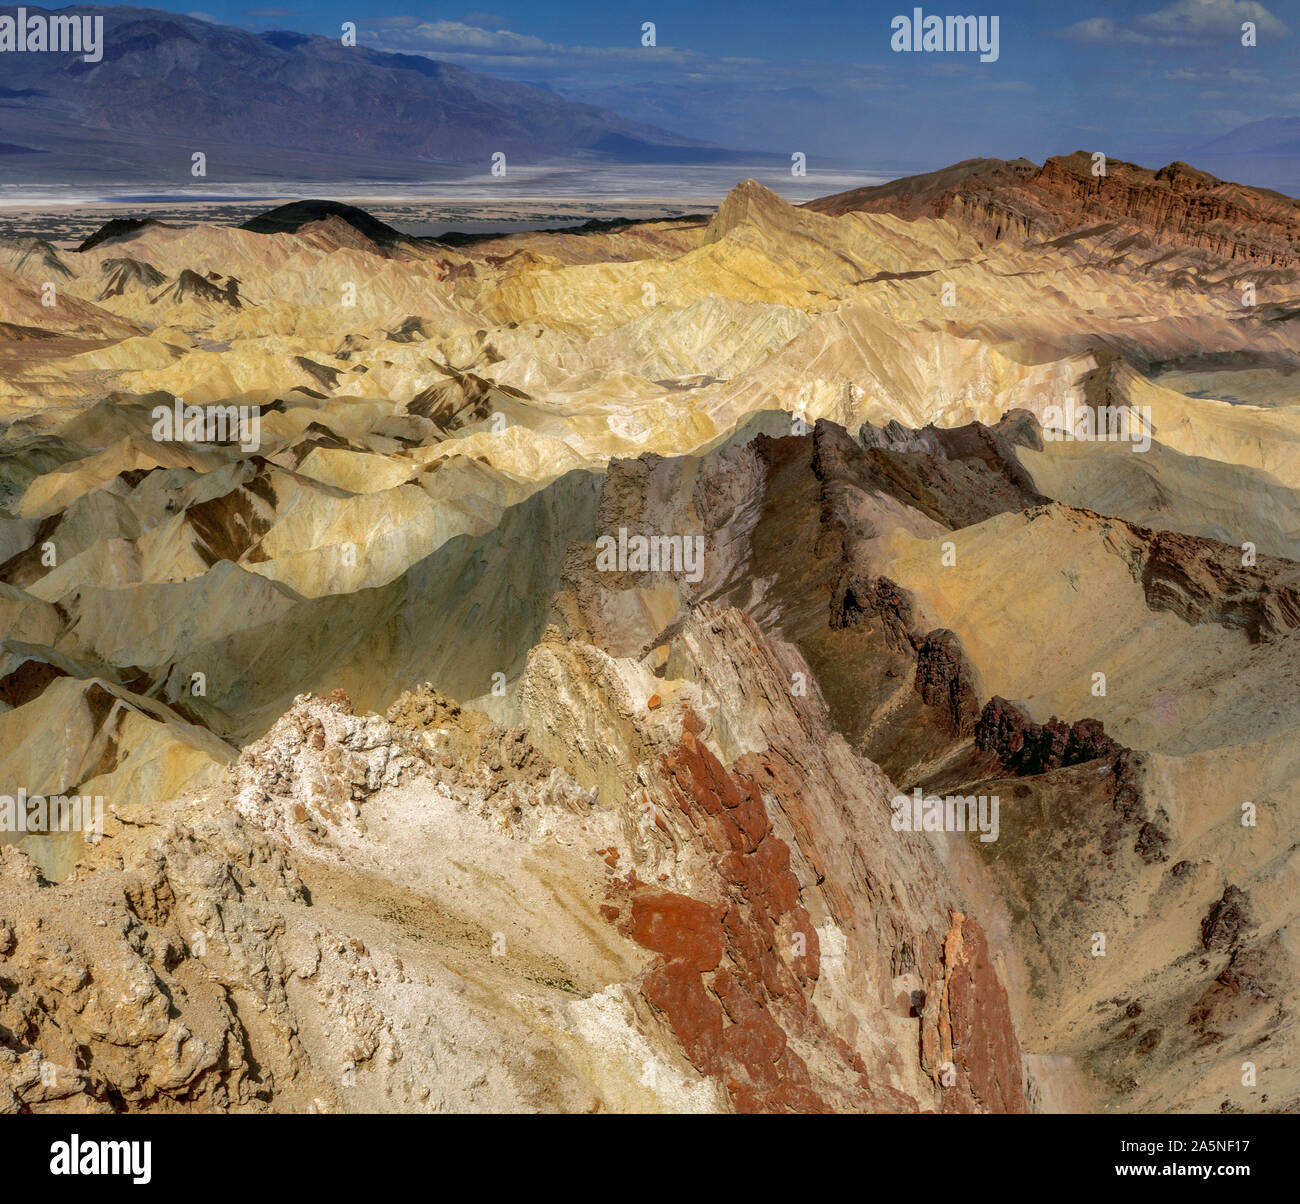 Golden Canyon, Zabriskie Point, Manly Beacon, Death Valley National Park, Californie Banque D'Images